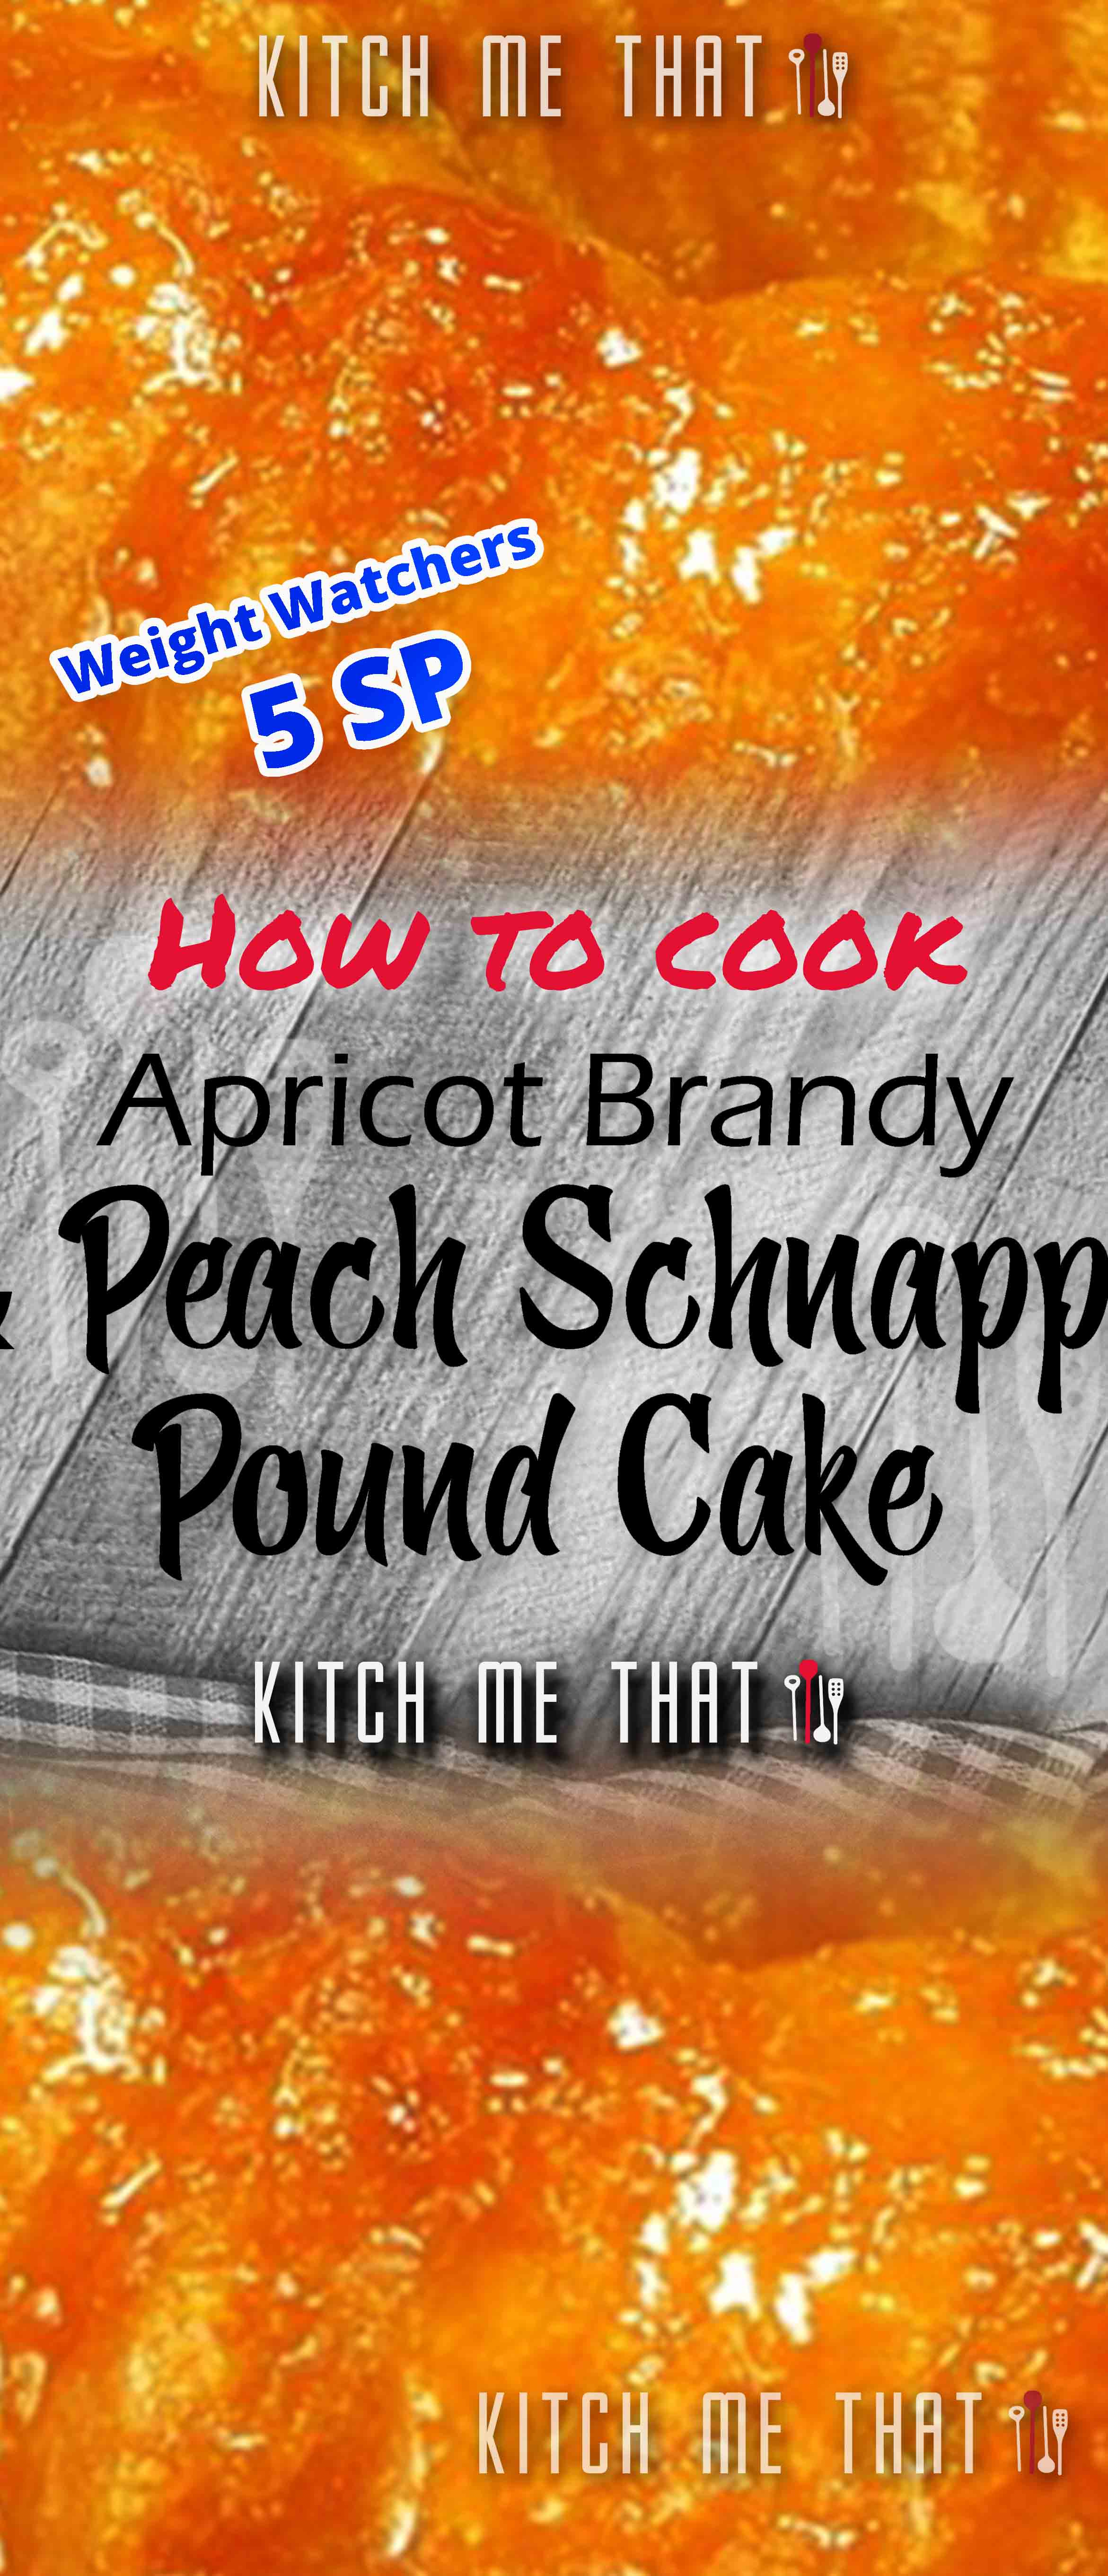 Exclusive Apricot Brandy And Peach Schnapps Pound Cake NEW 2021